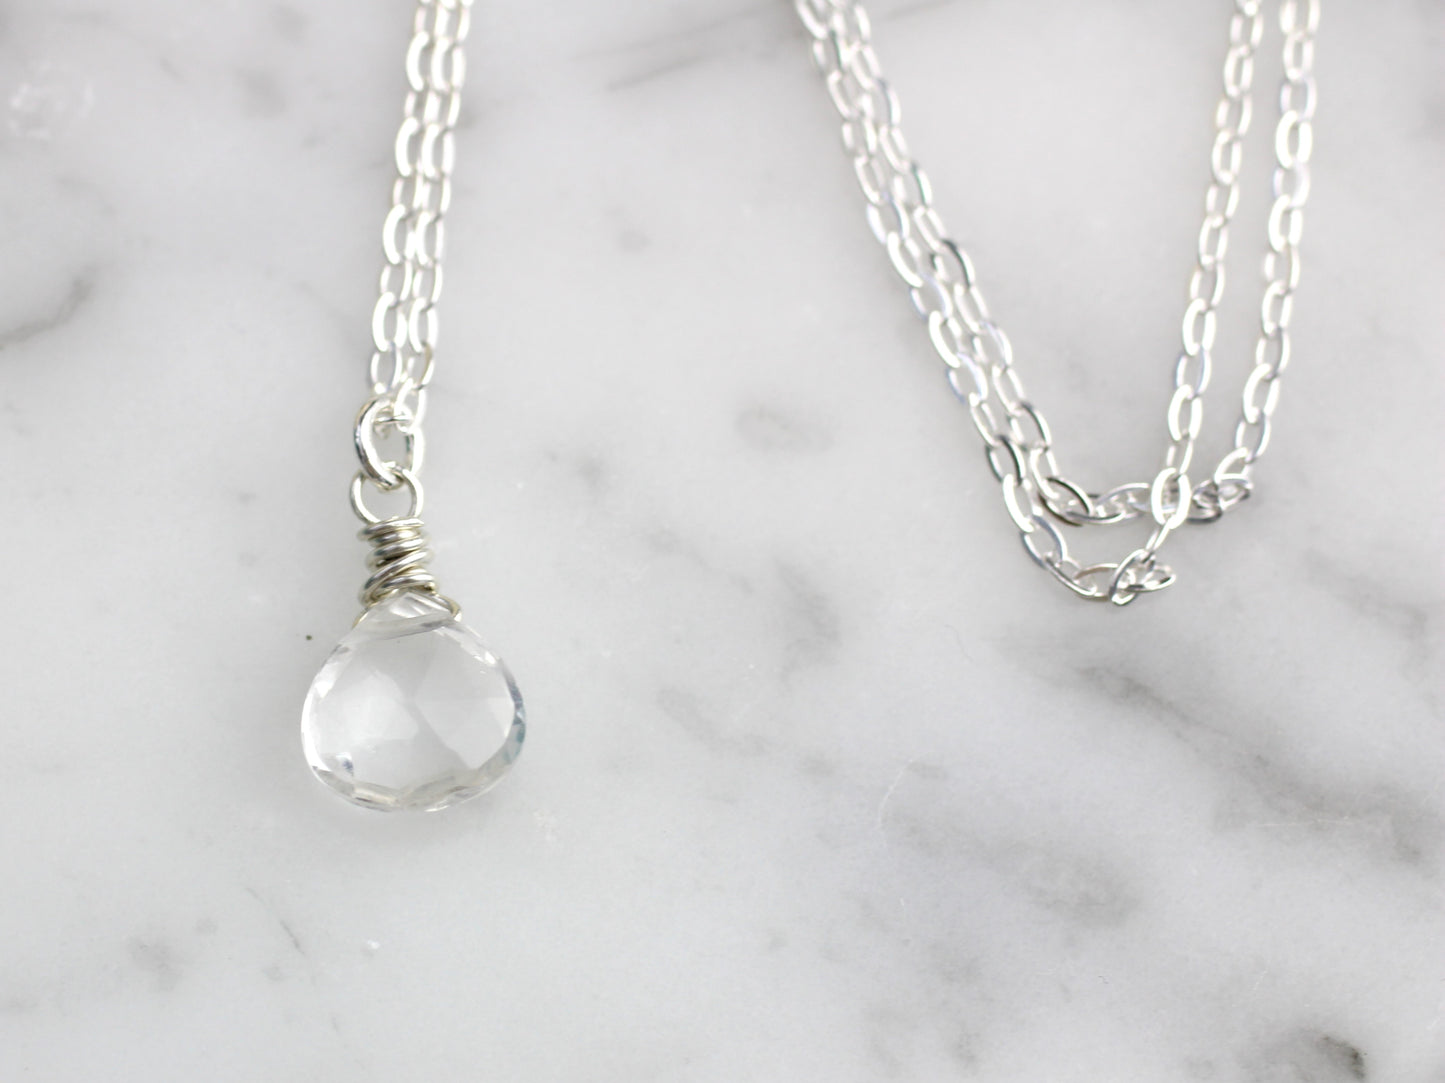 Clear quartz necklace in silver or gold.